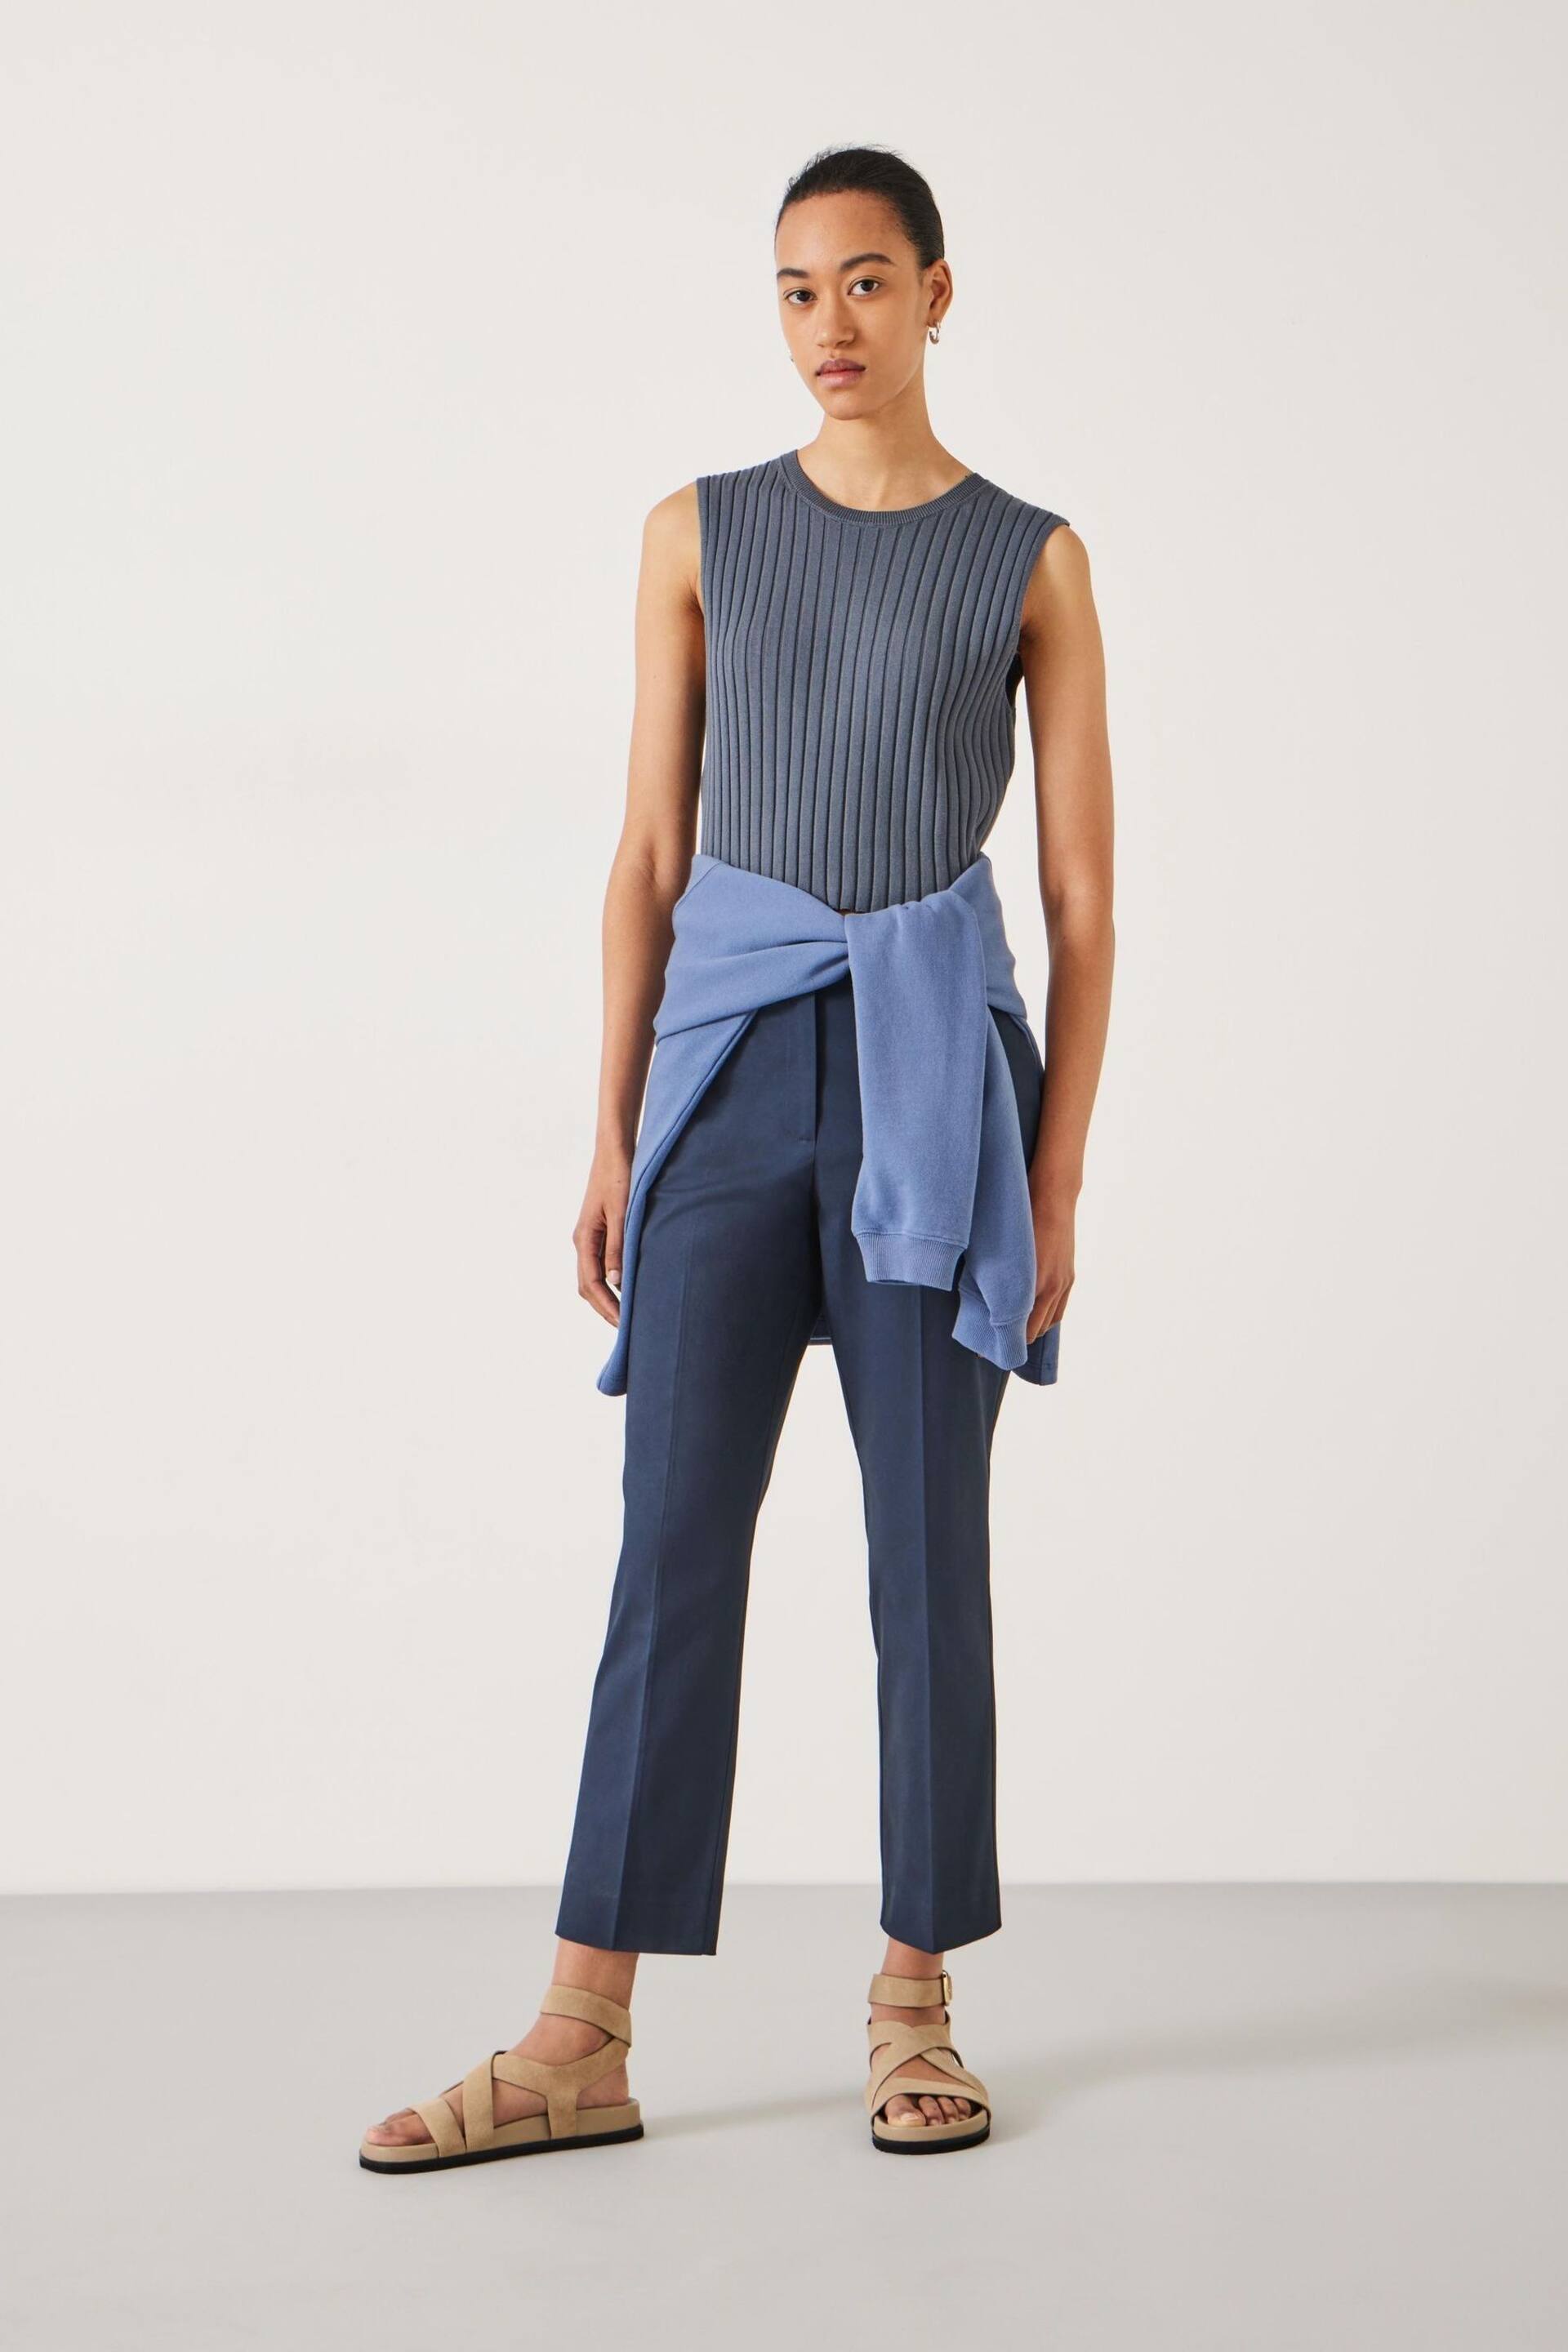 Hush Blue Hayes Cigarette Trousers - Image 3 of 5